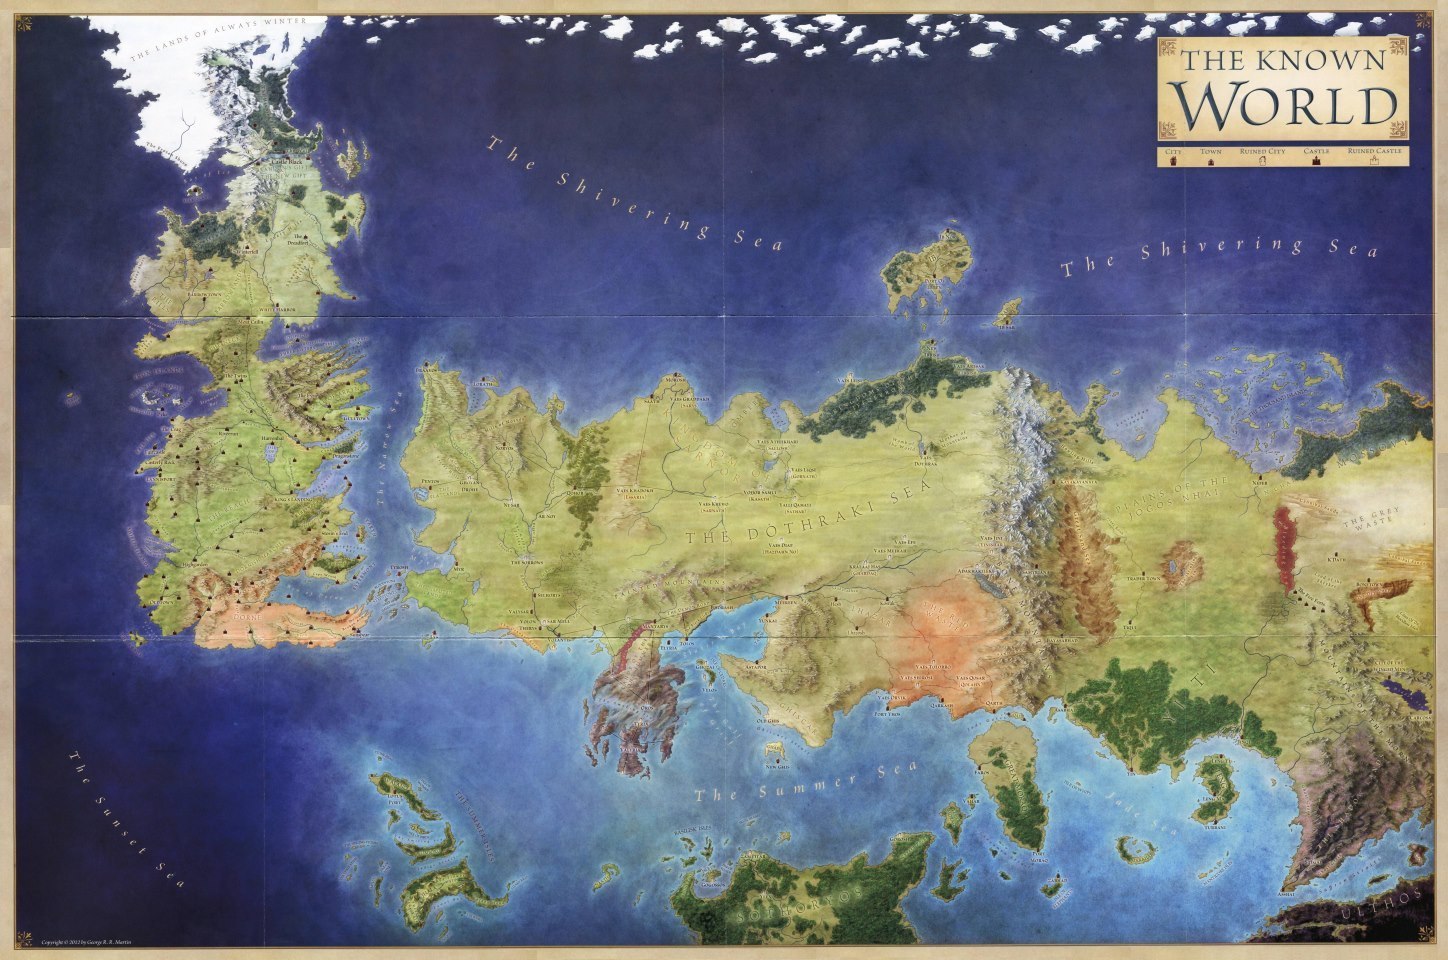 What is north of Westeros and east of Essos? Maybe it's one continent... - Game of Thrones, Westeros, Essos, Song of Ice and Fire